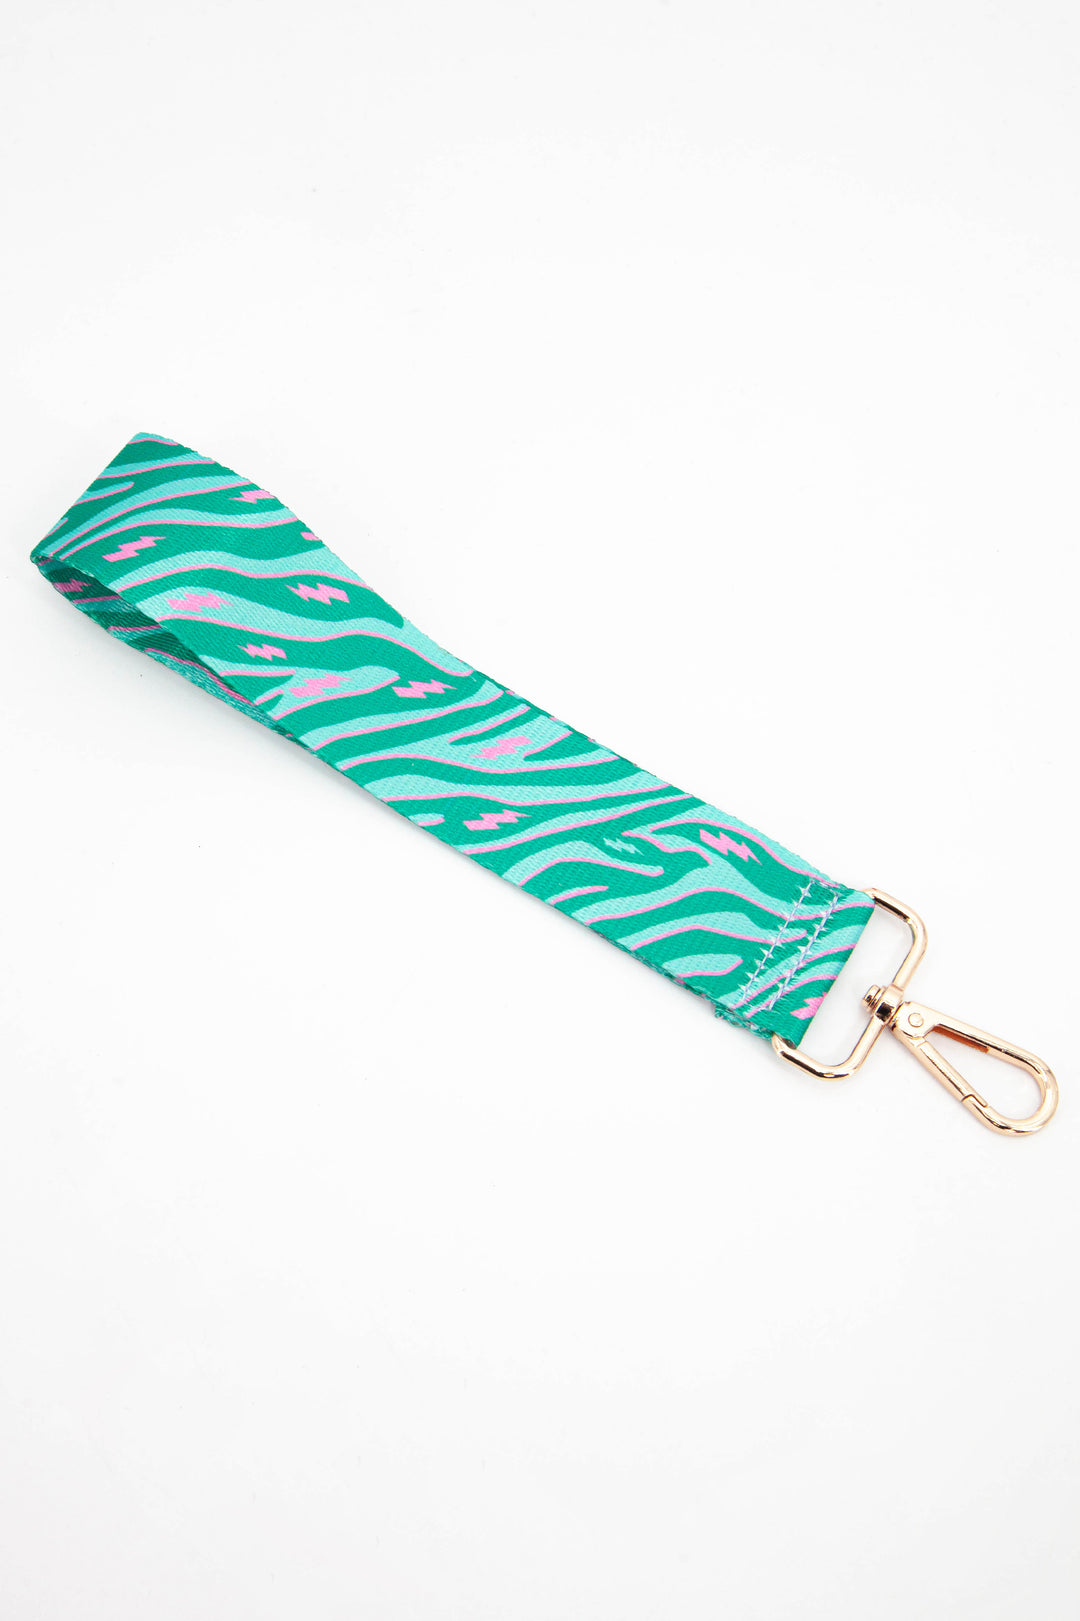 green and pink zebra and lightning bolt pattern detachable wrist strap for a small clutch bag